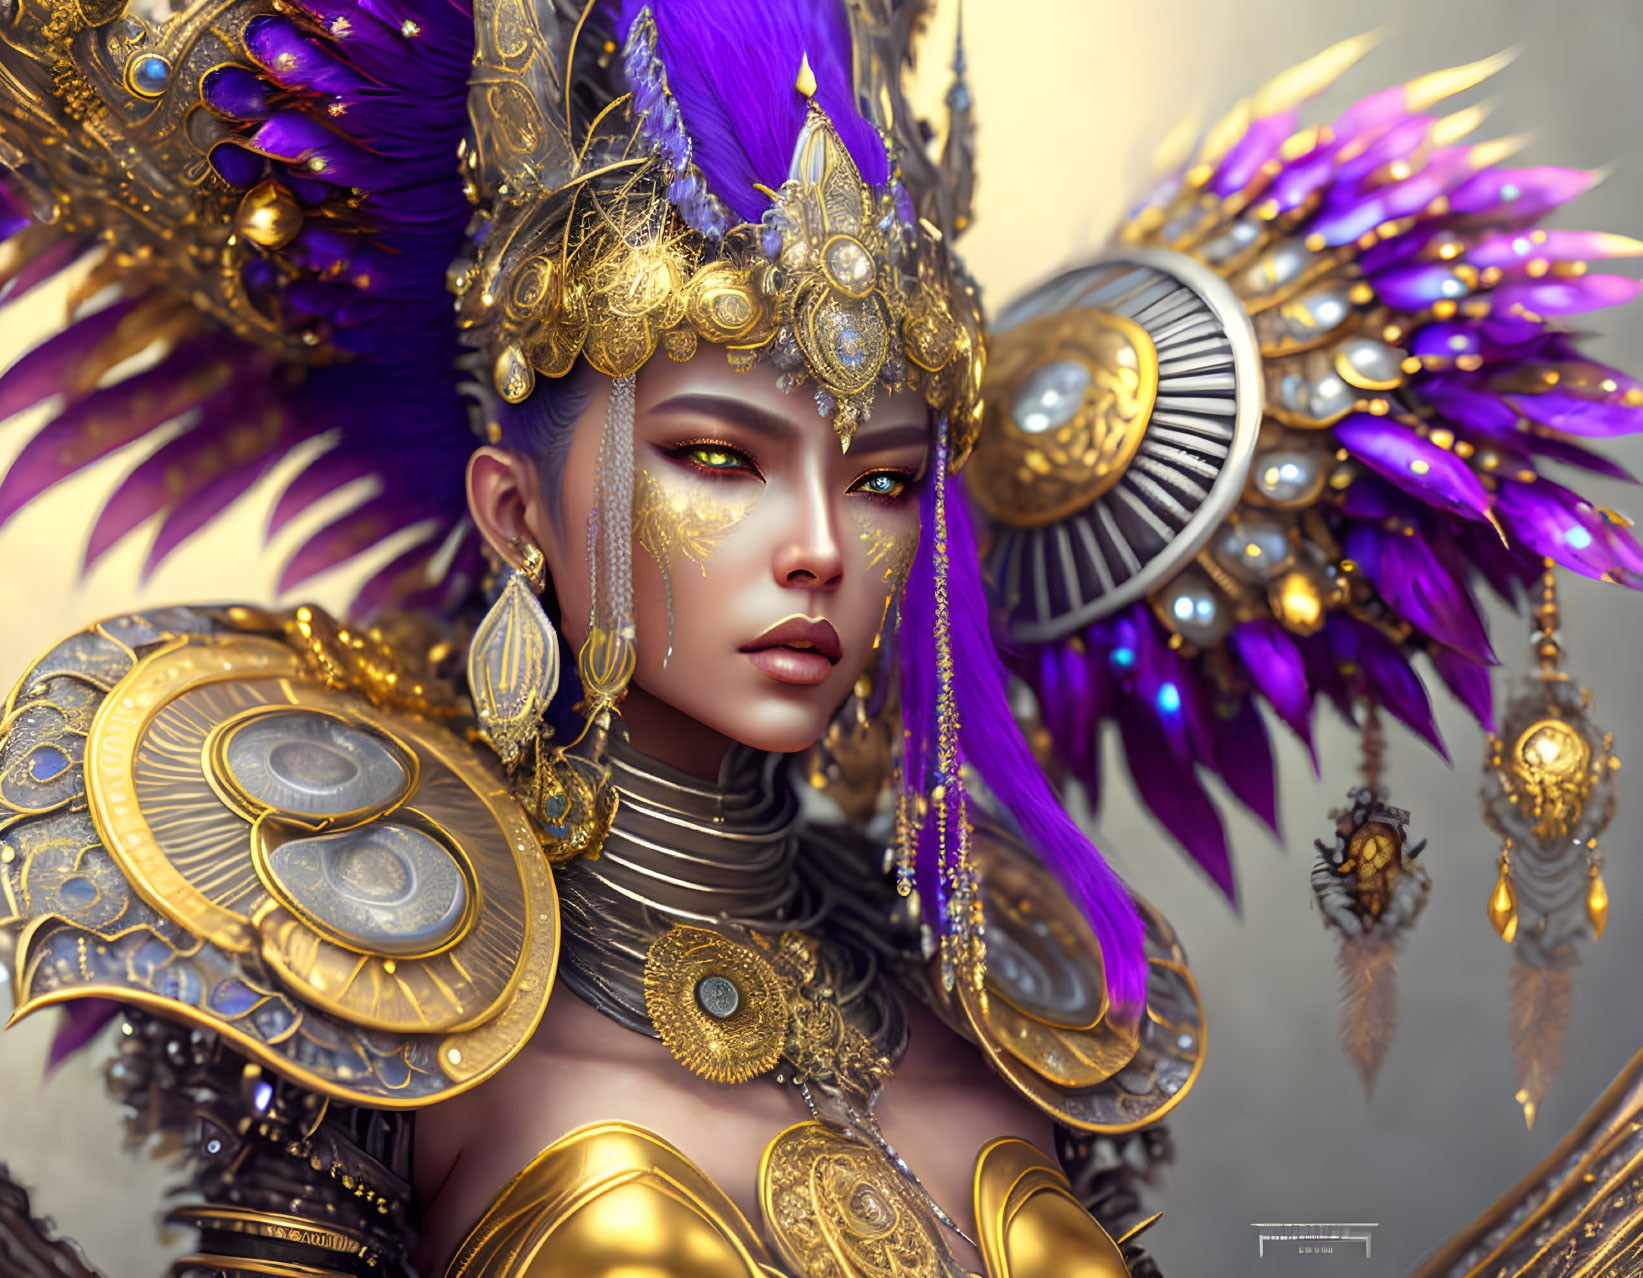 Digital artwork: Woman in golden and purple armor with feathers and regal headdress